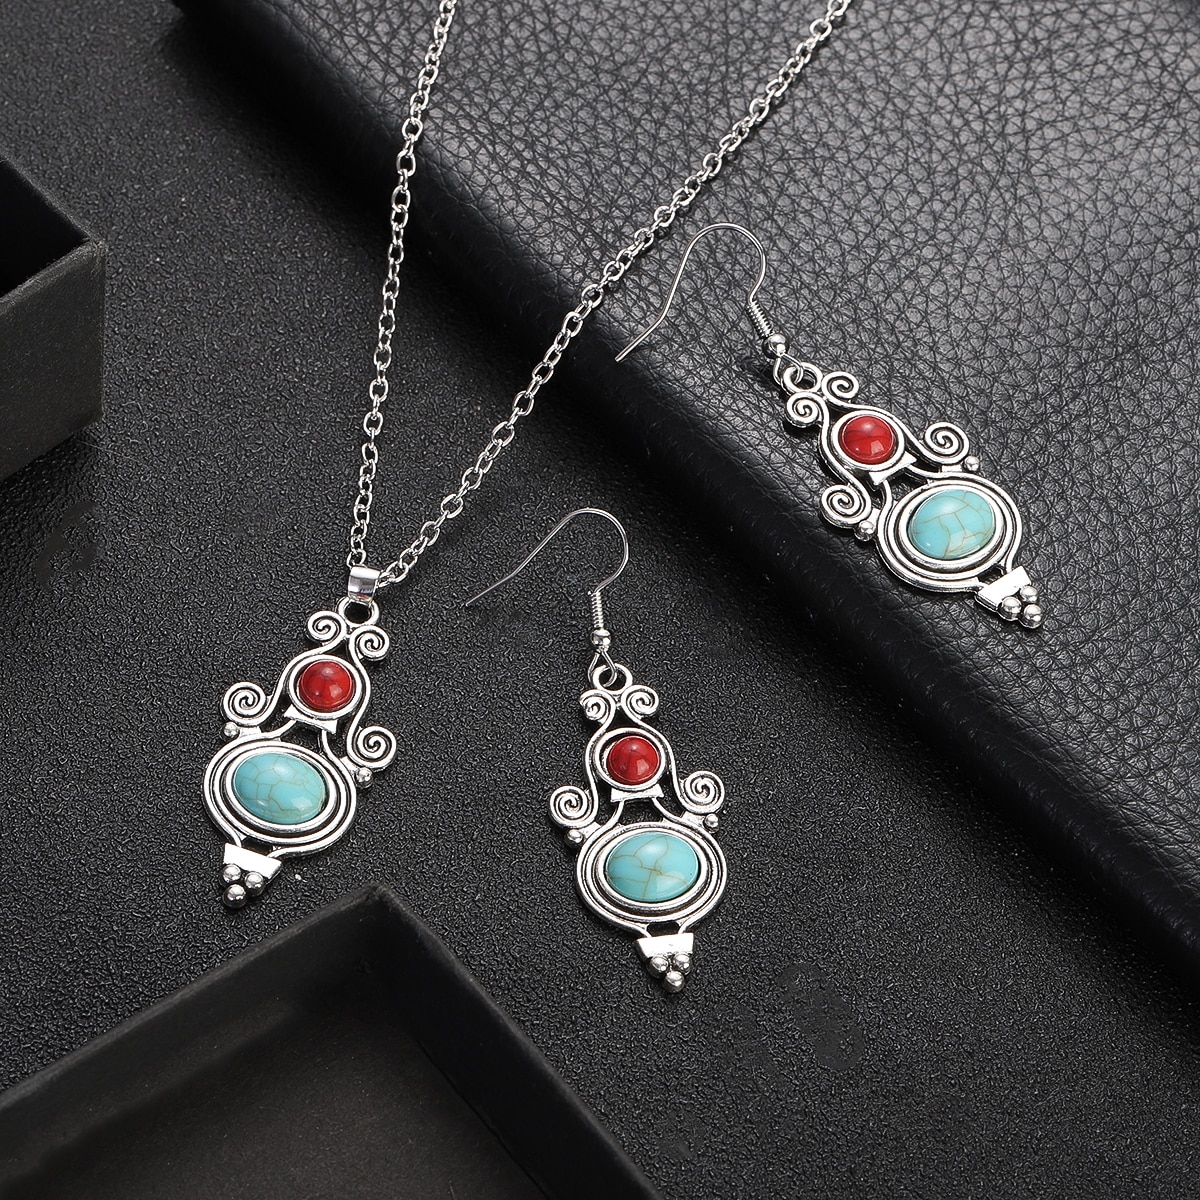 Ethnic-Boho-Red-Blue-Stone-Pendant-Necklace-Earring-Set-Women-Girls-Silver-Color-Geometric-Jewelry-S-1005004921122202-1